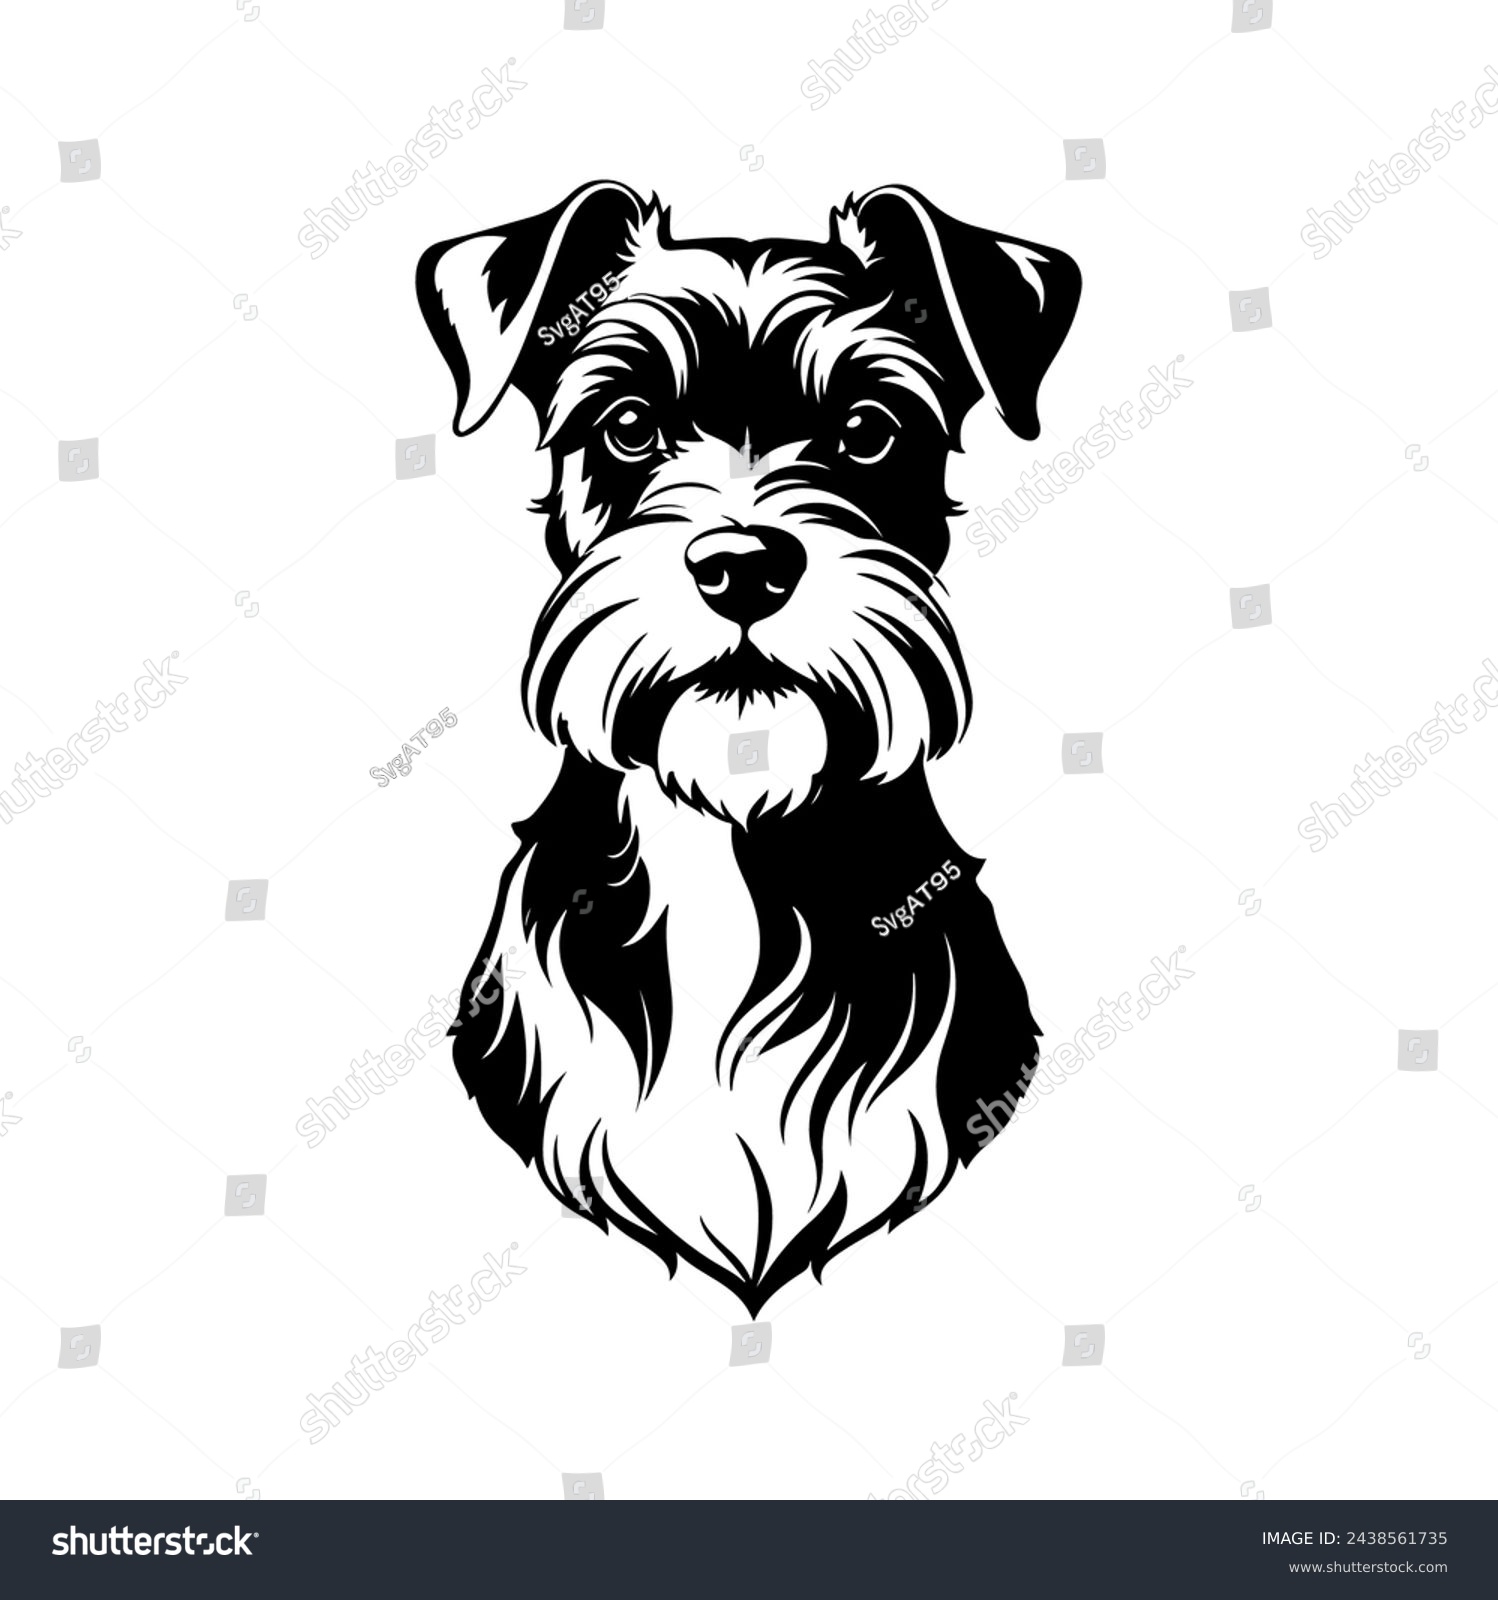 SVG of Portrait of a Miniature Schnauzer Dog Vector isolated on white background, Dog Silhouettes. svg